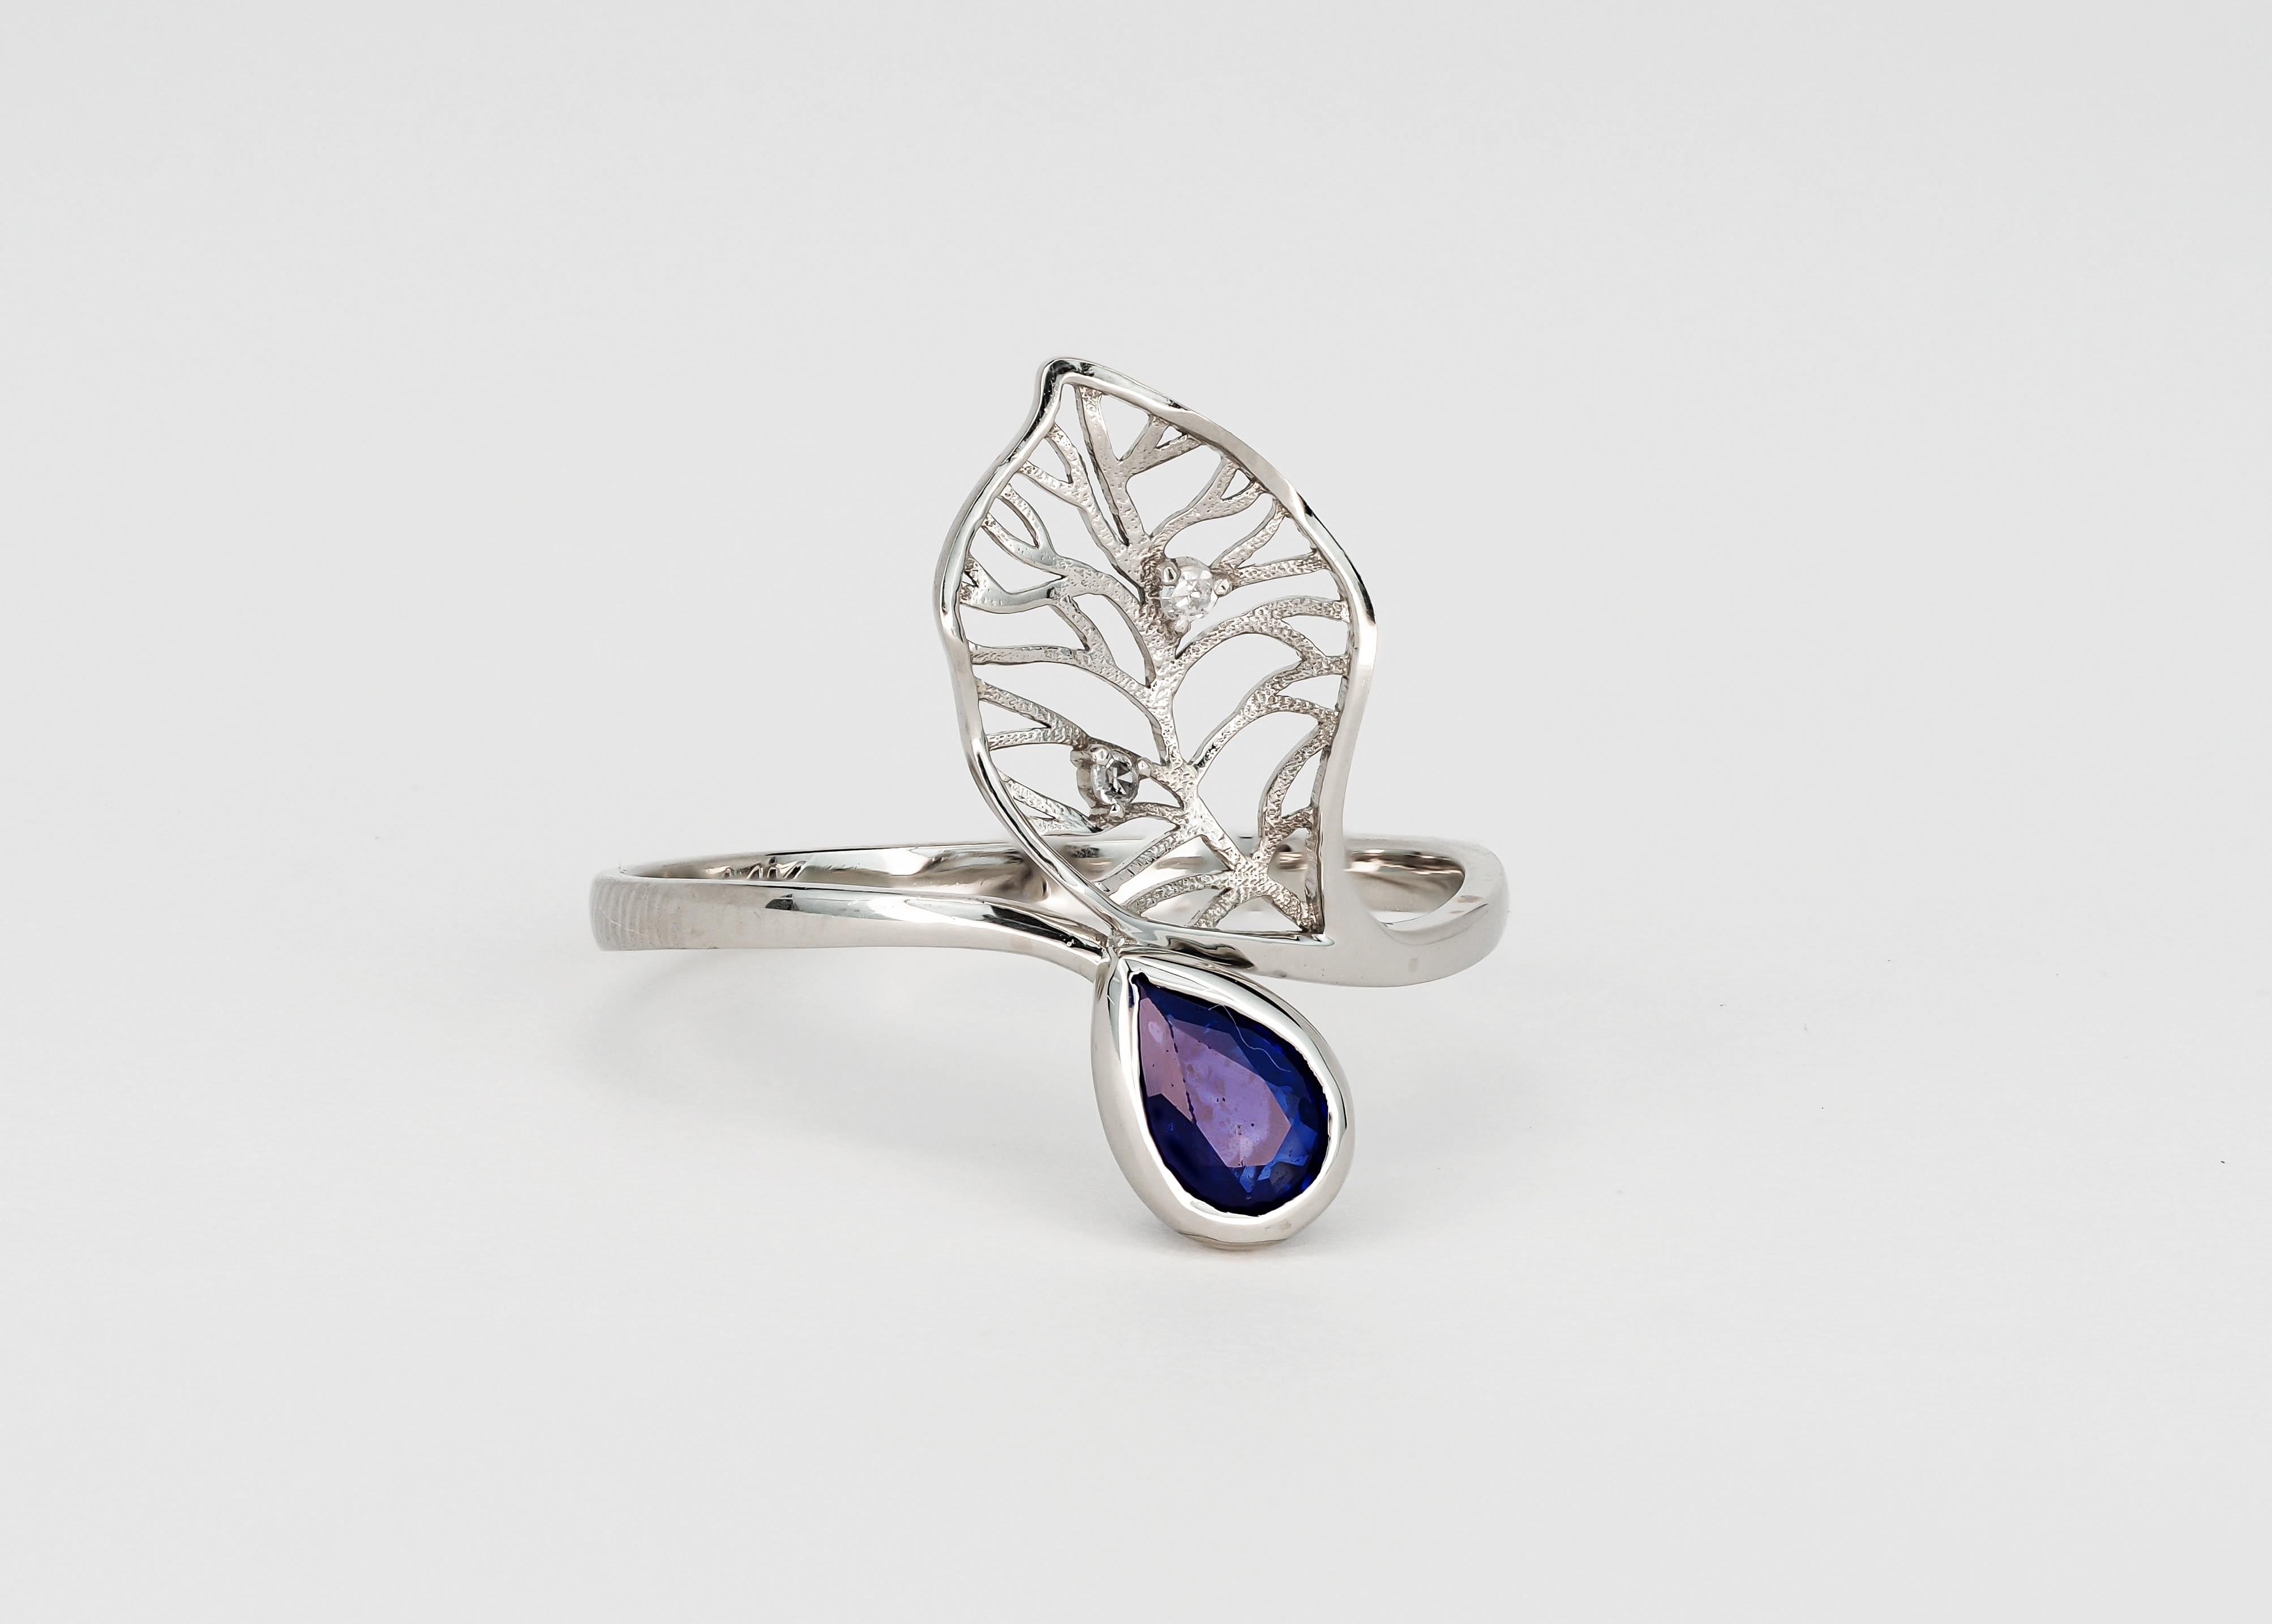 Modern 14 Karat Gold Ring with Sapphire and Diamonds. Floral Design Ring with Sapphire For Sale